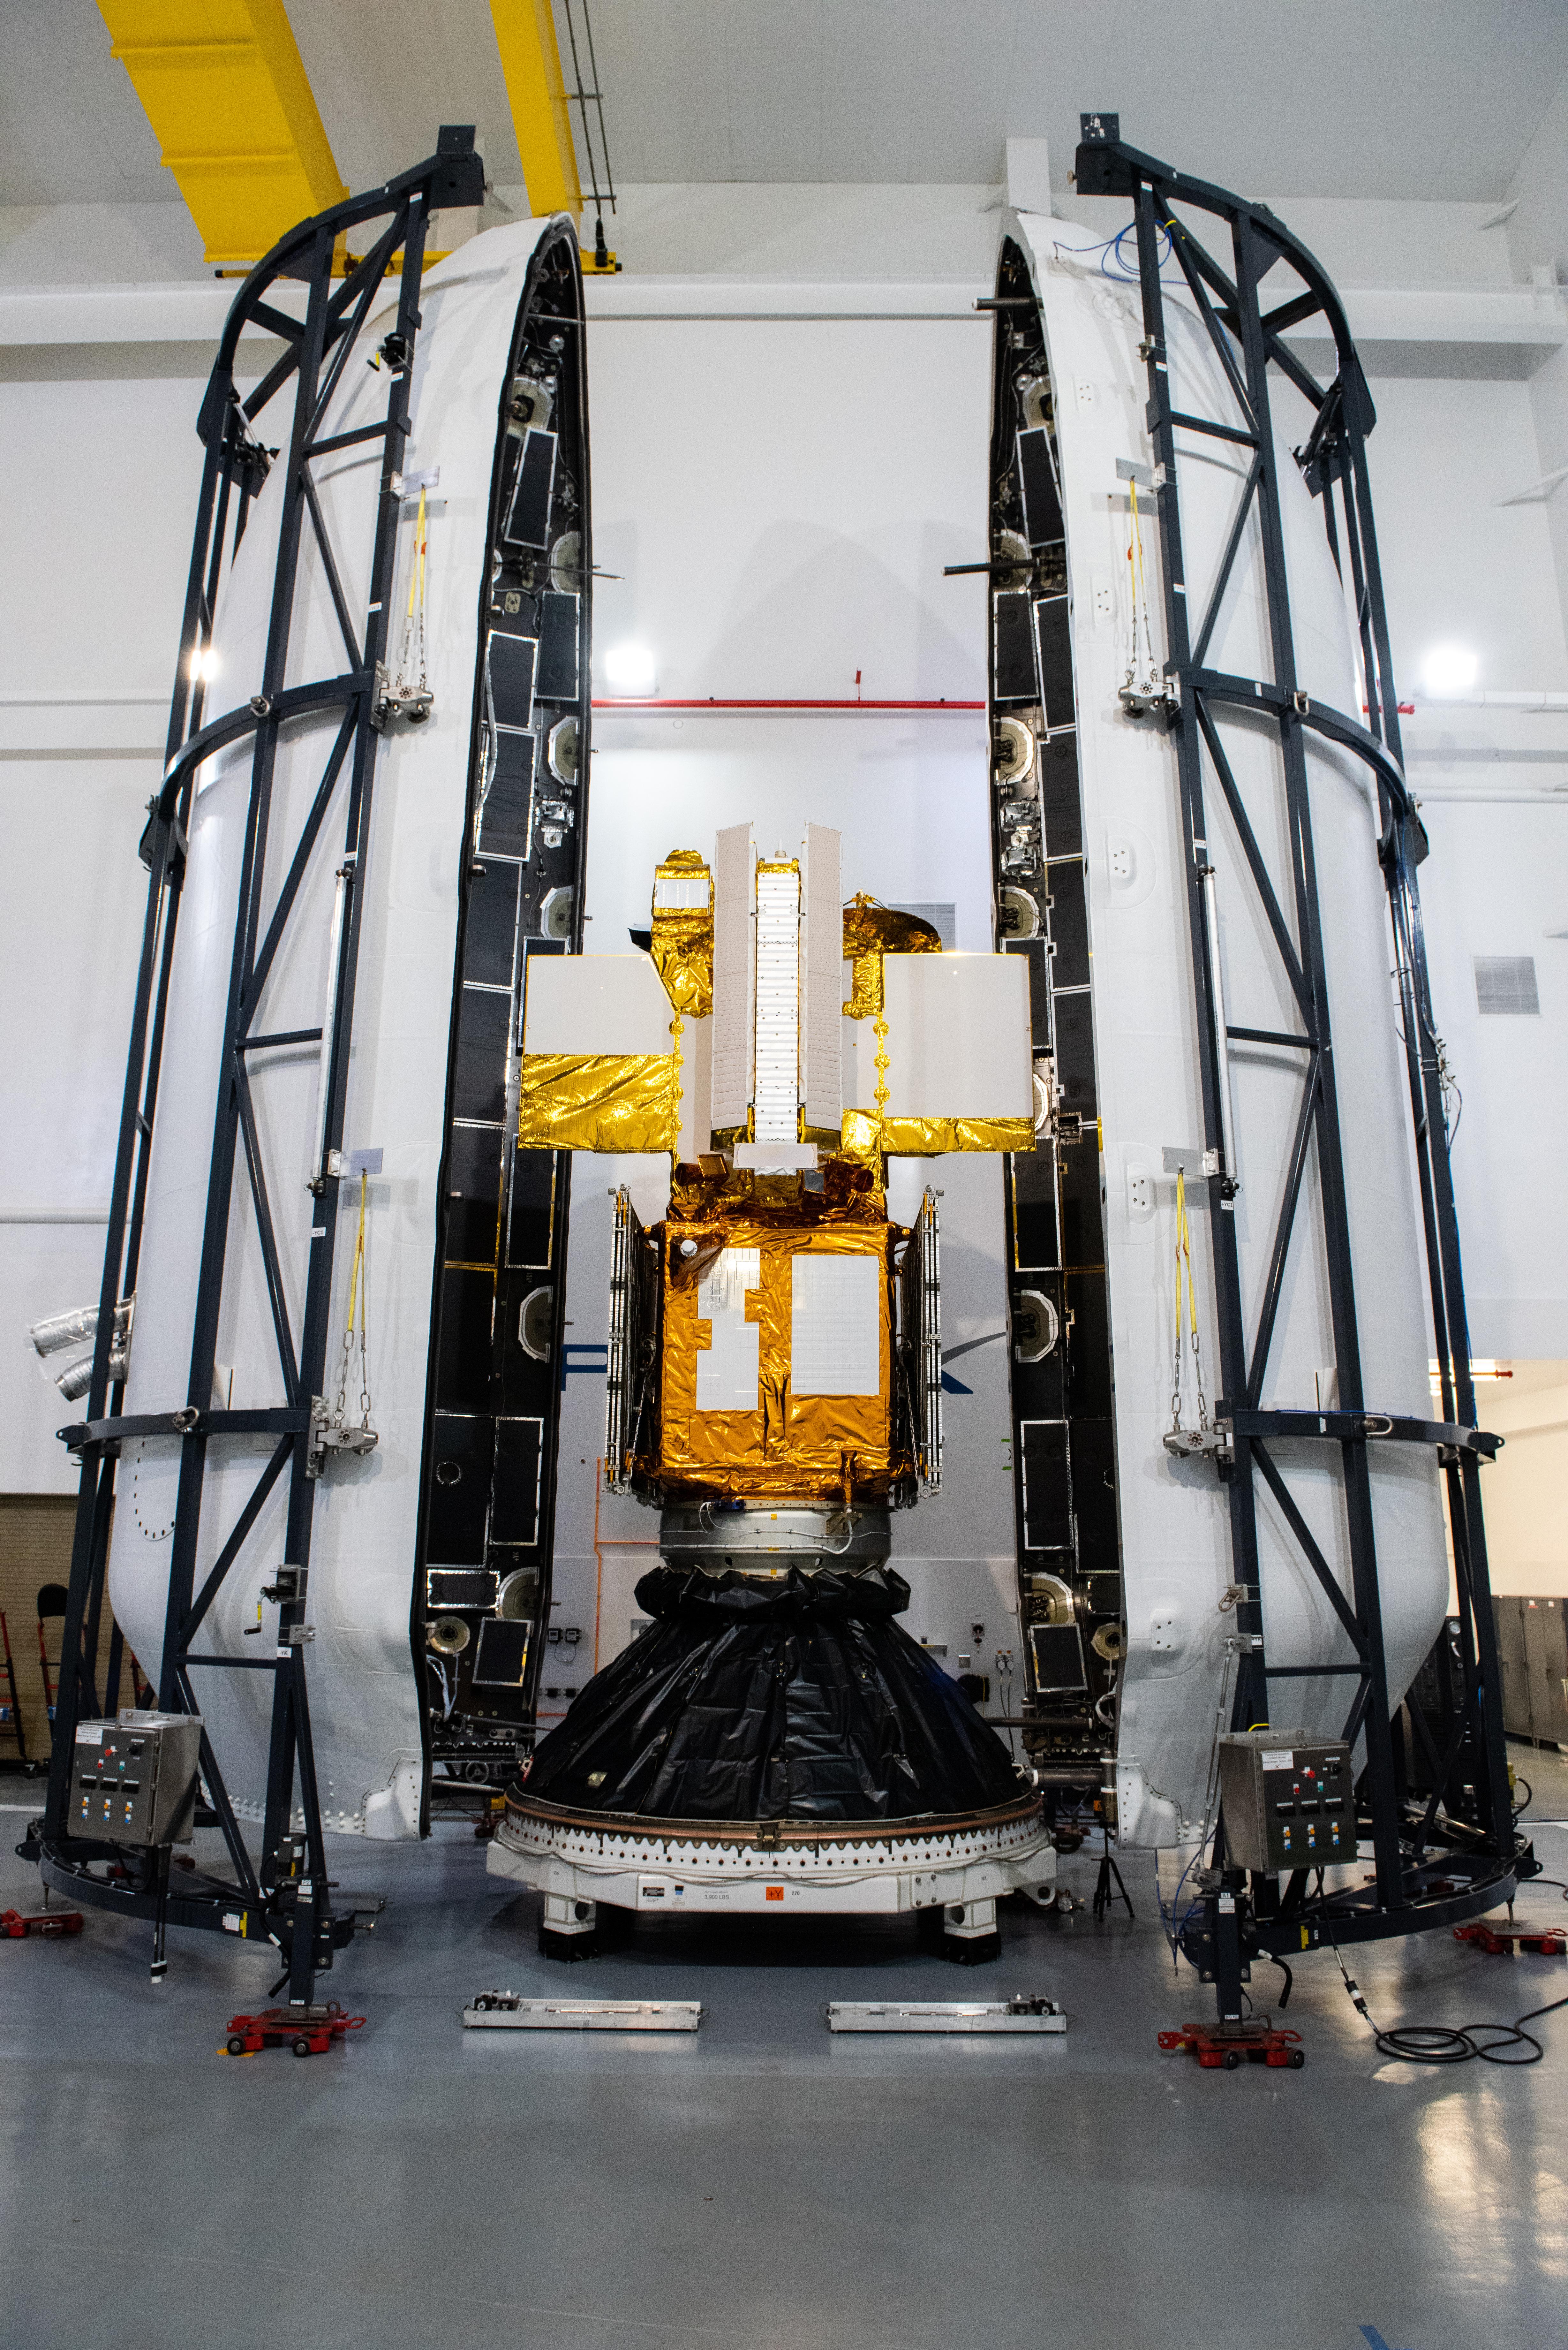 A photo of the SWOT satellite being encapsulated in its payload fairing.